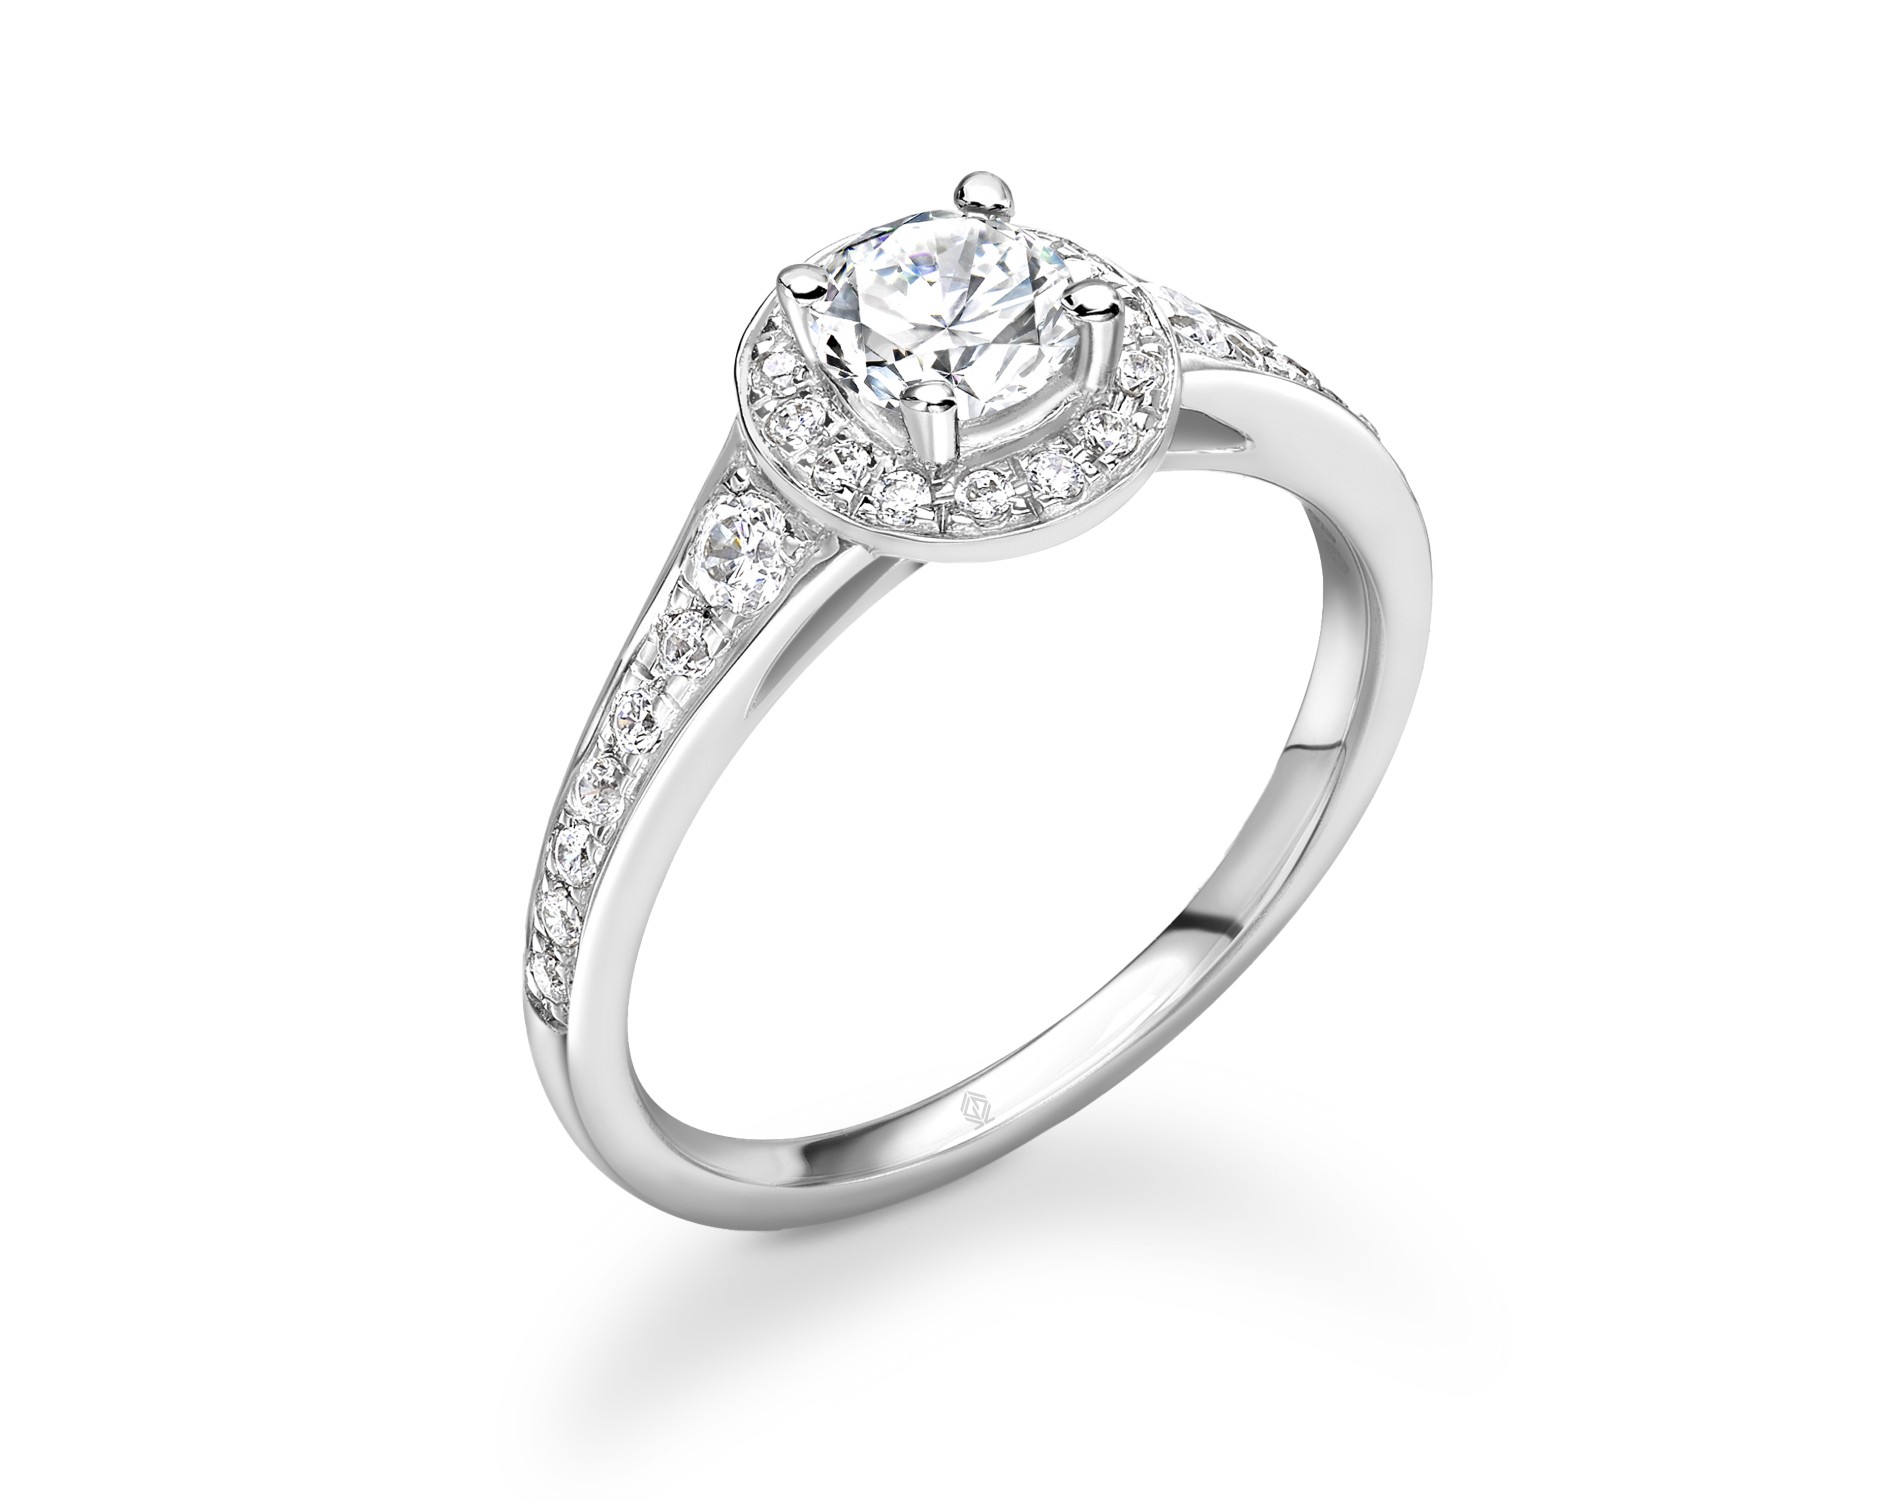 18K WHITE GOLD ROUND CUT HALO DIAMOND ENGAGEMENT RING WITH SIDE STONES CHANNEL SET